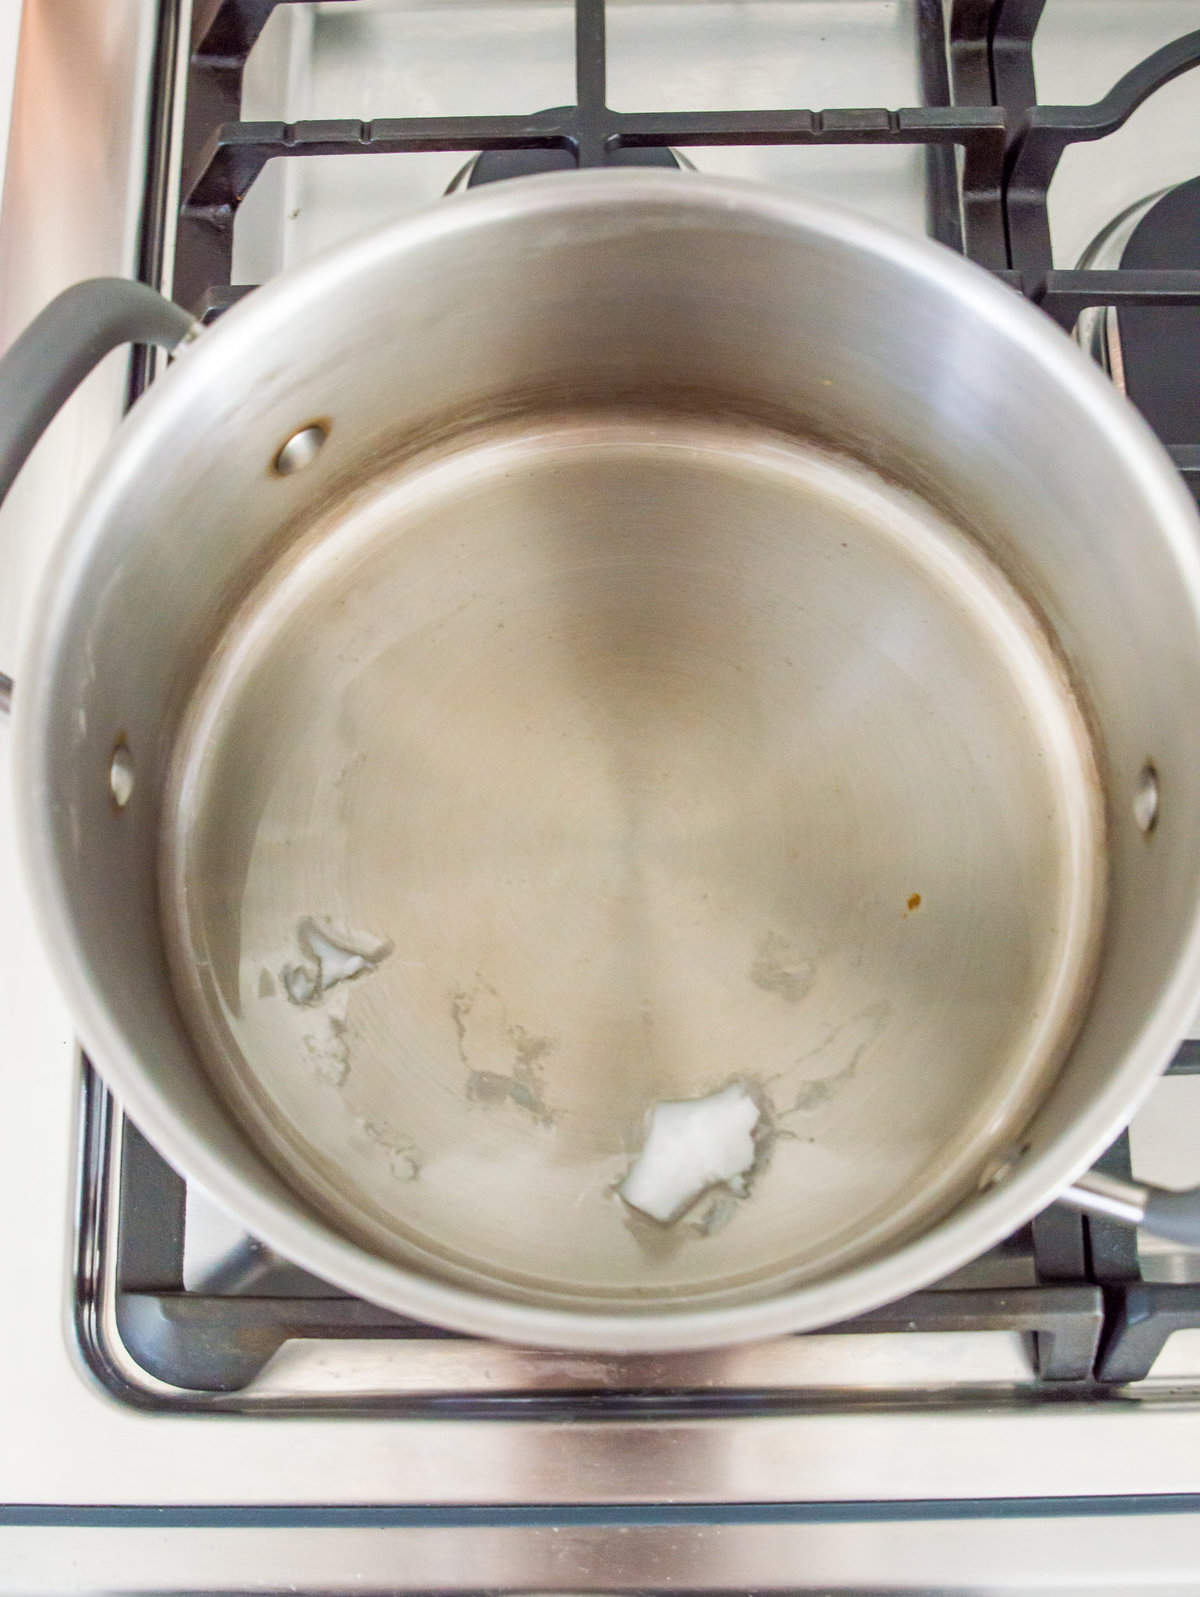 A large pot on the stovetop with coconut oil in it.